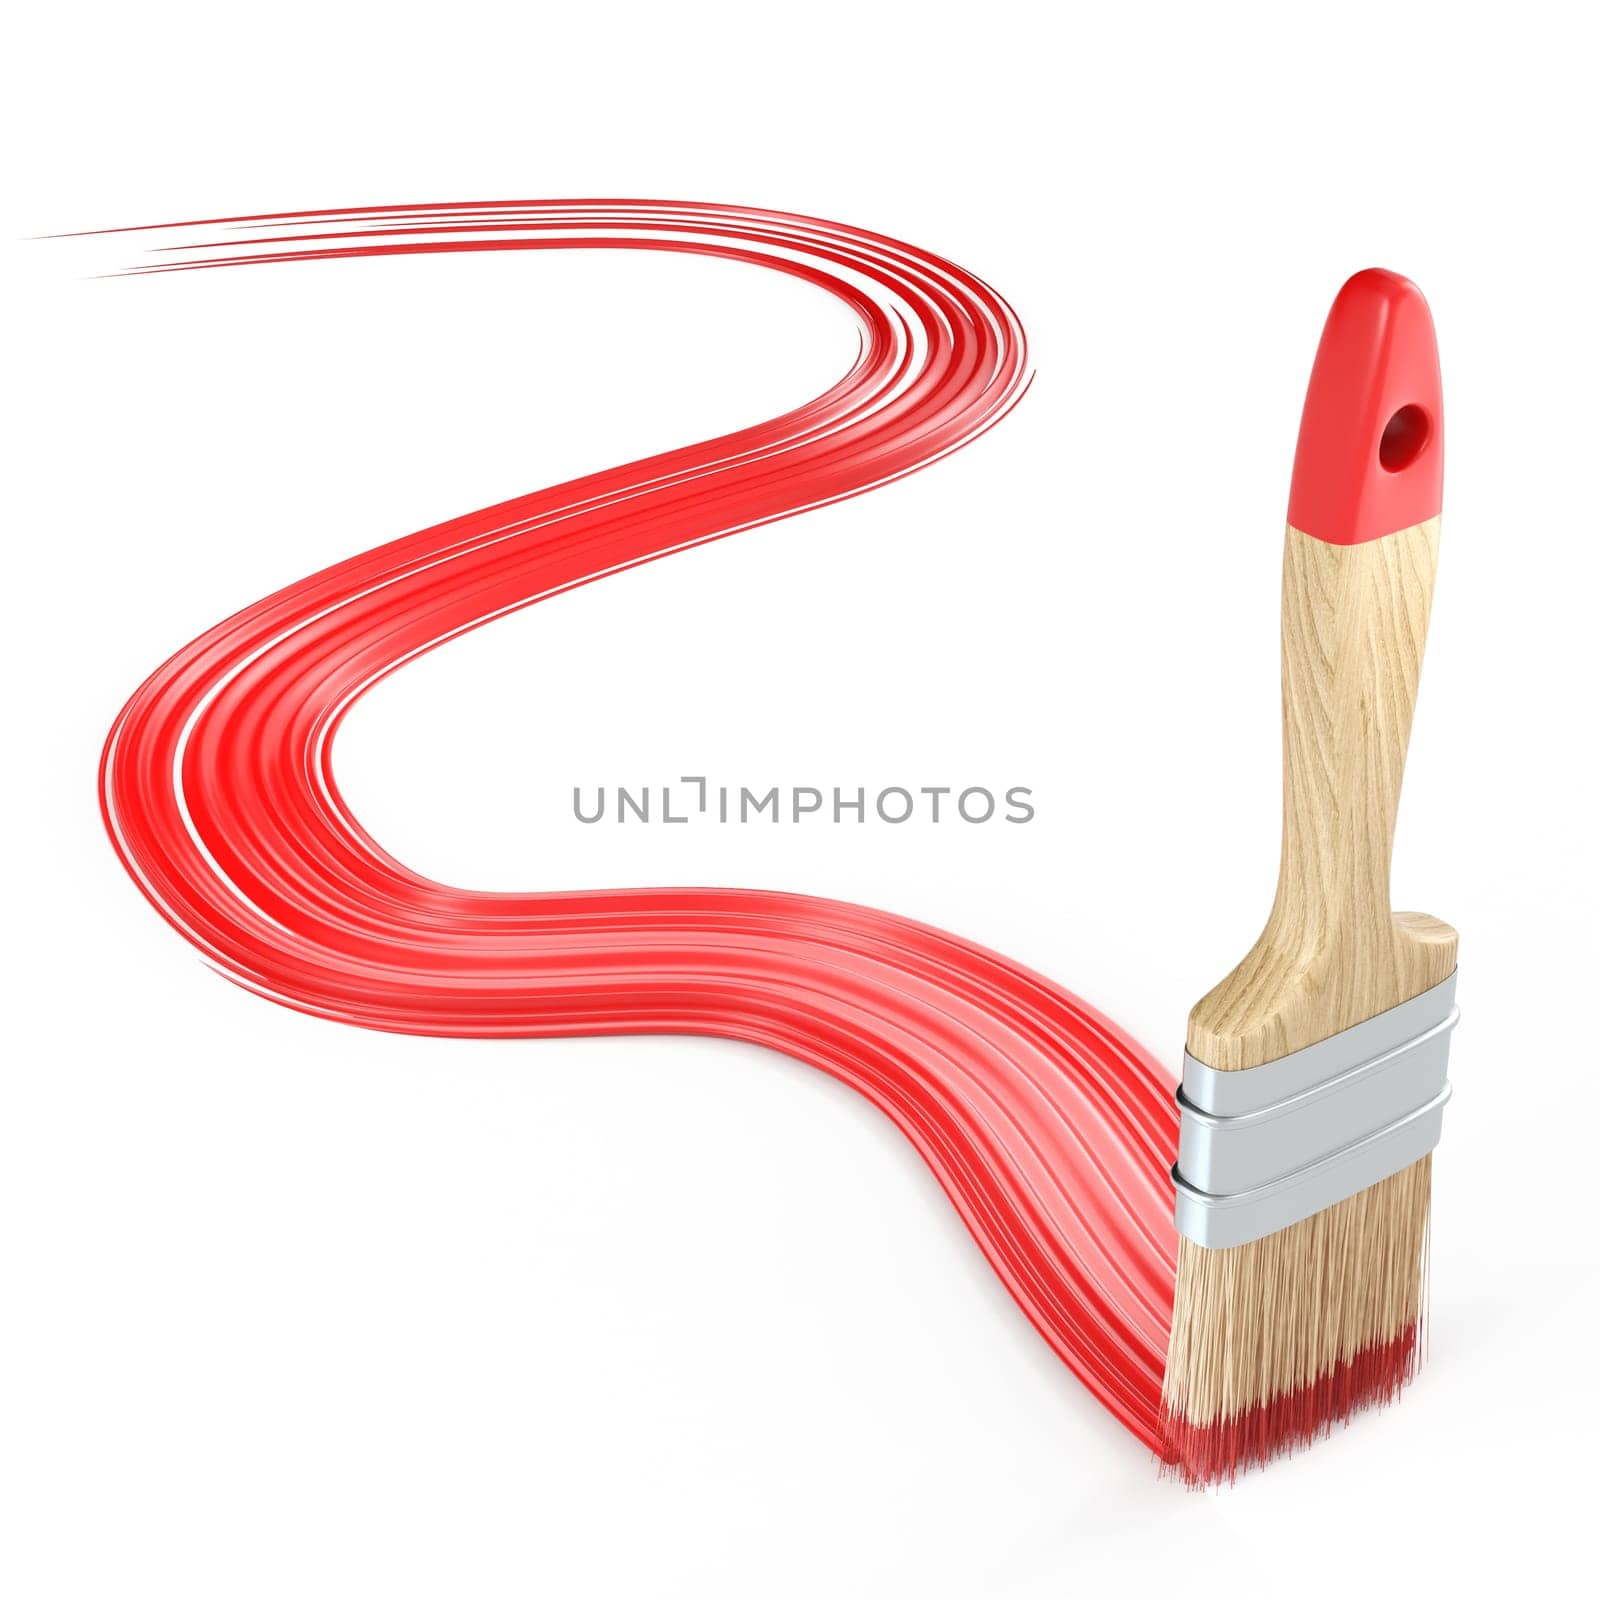 Wooden paintbrush painting red line 3D by djmilic